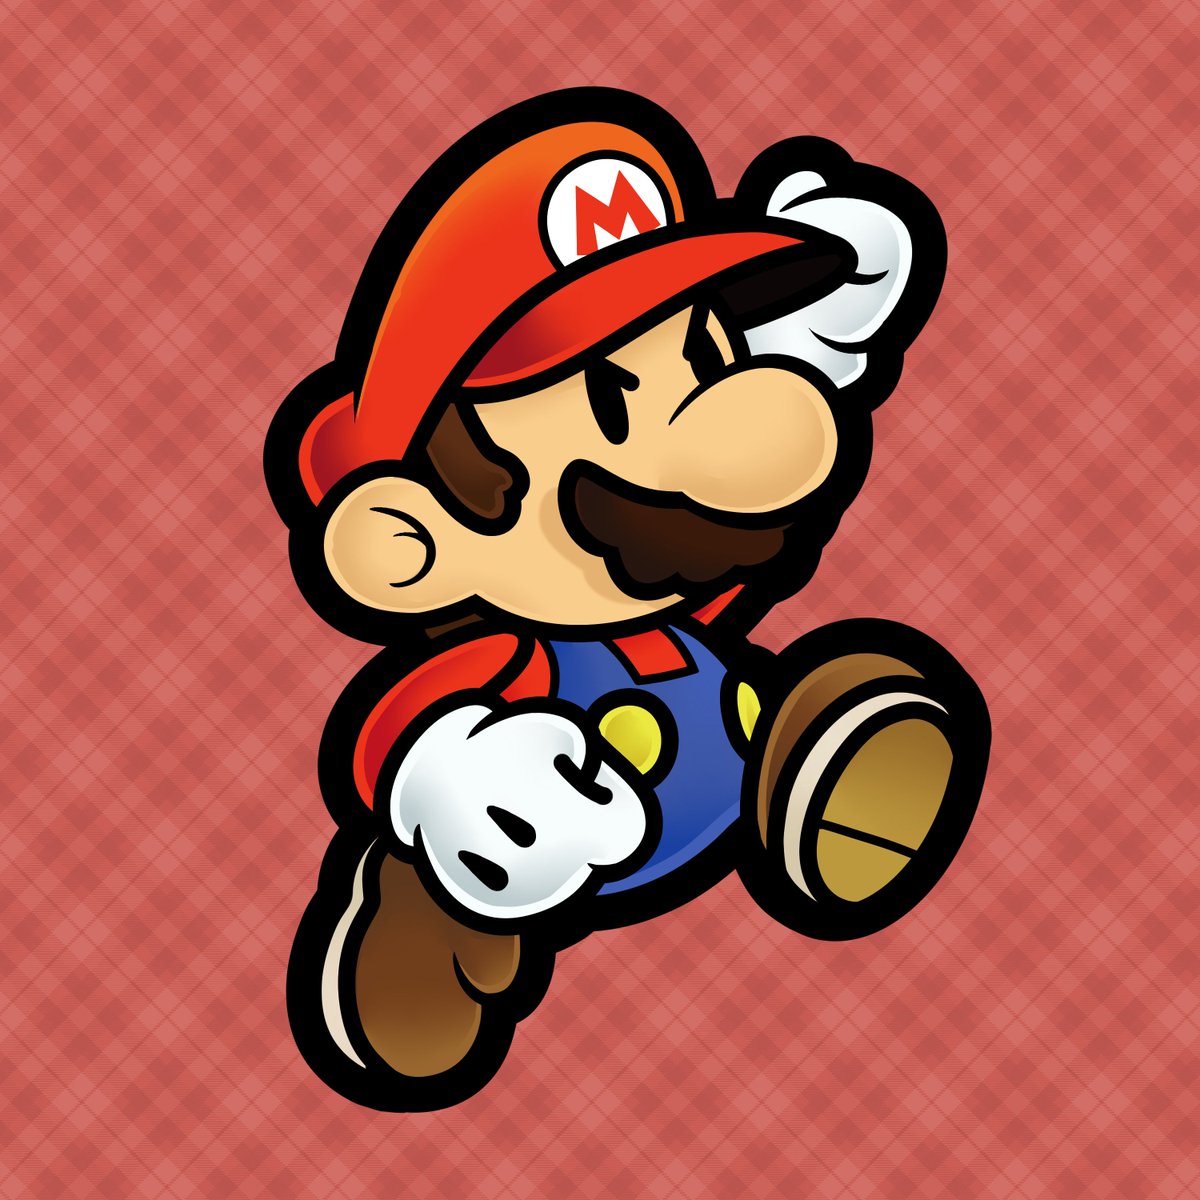 Paper Mario commission for @LegendaryJband!I love drawing this paper boyepi...